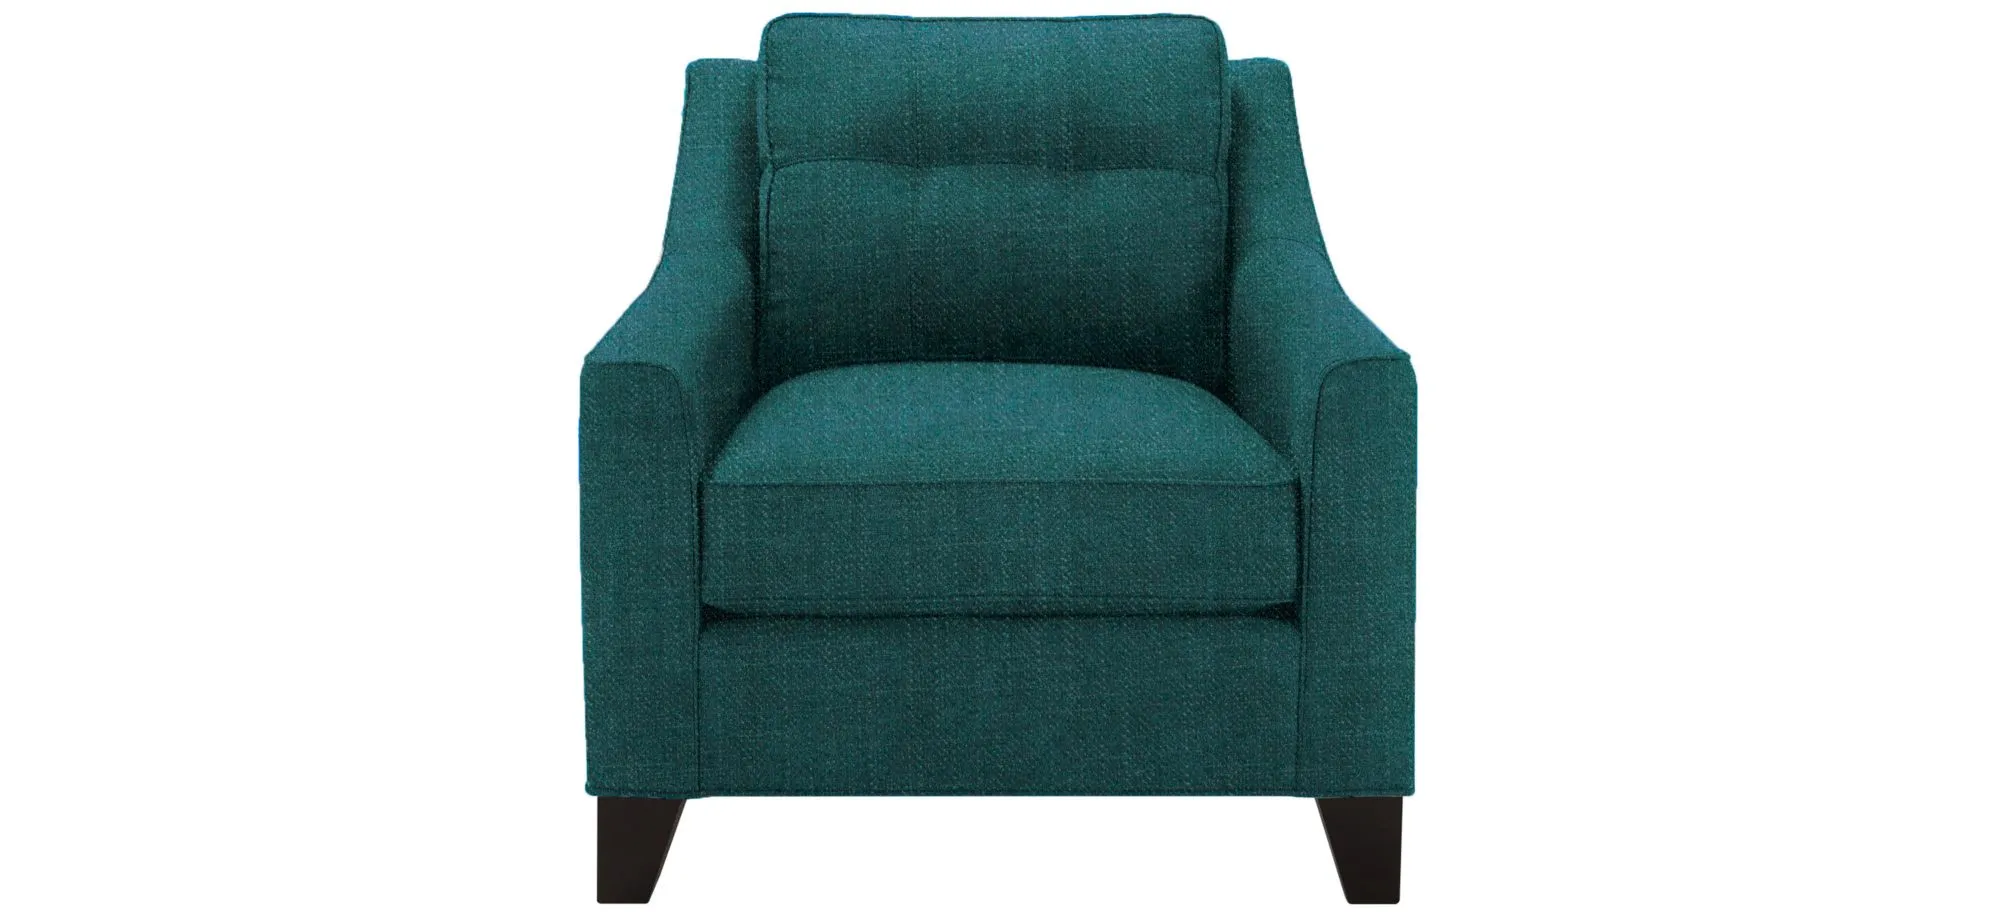 Carmine Chair in Elliot Teal by H.M. Richards